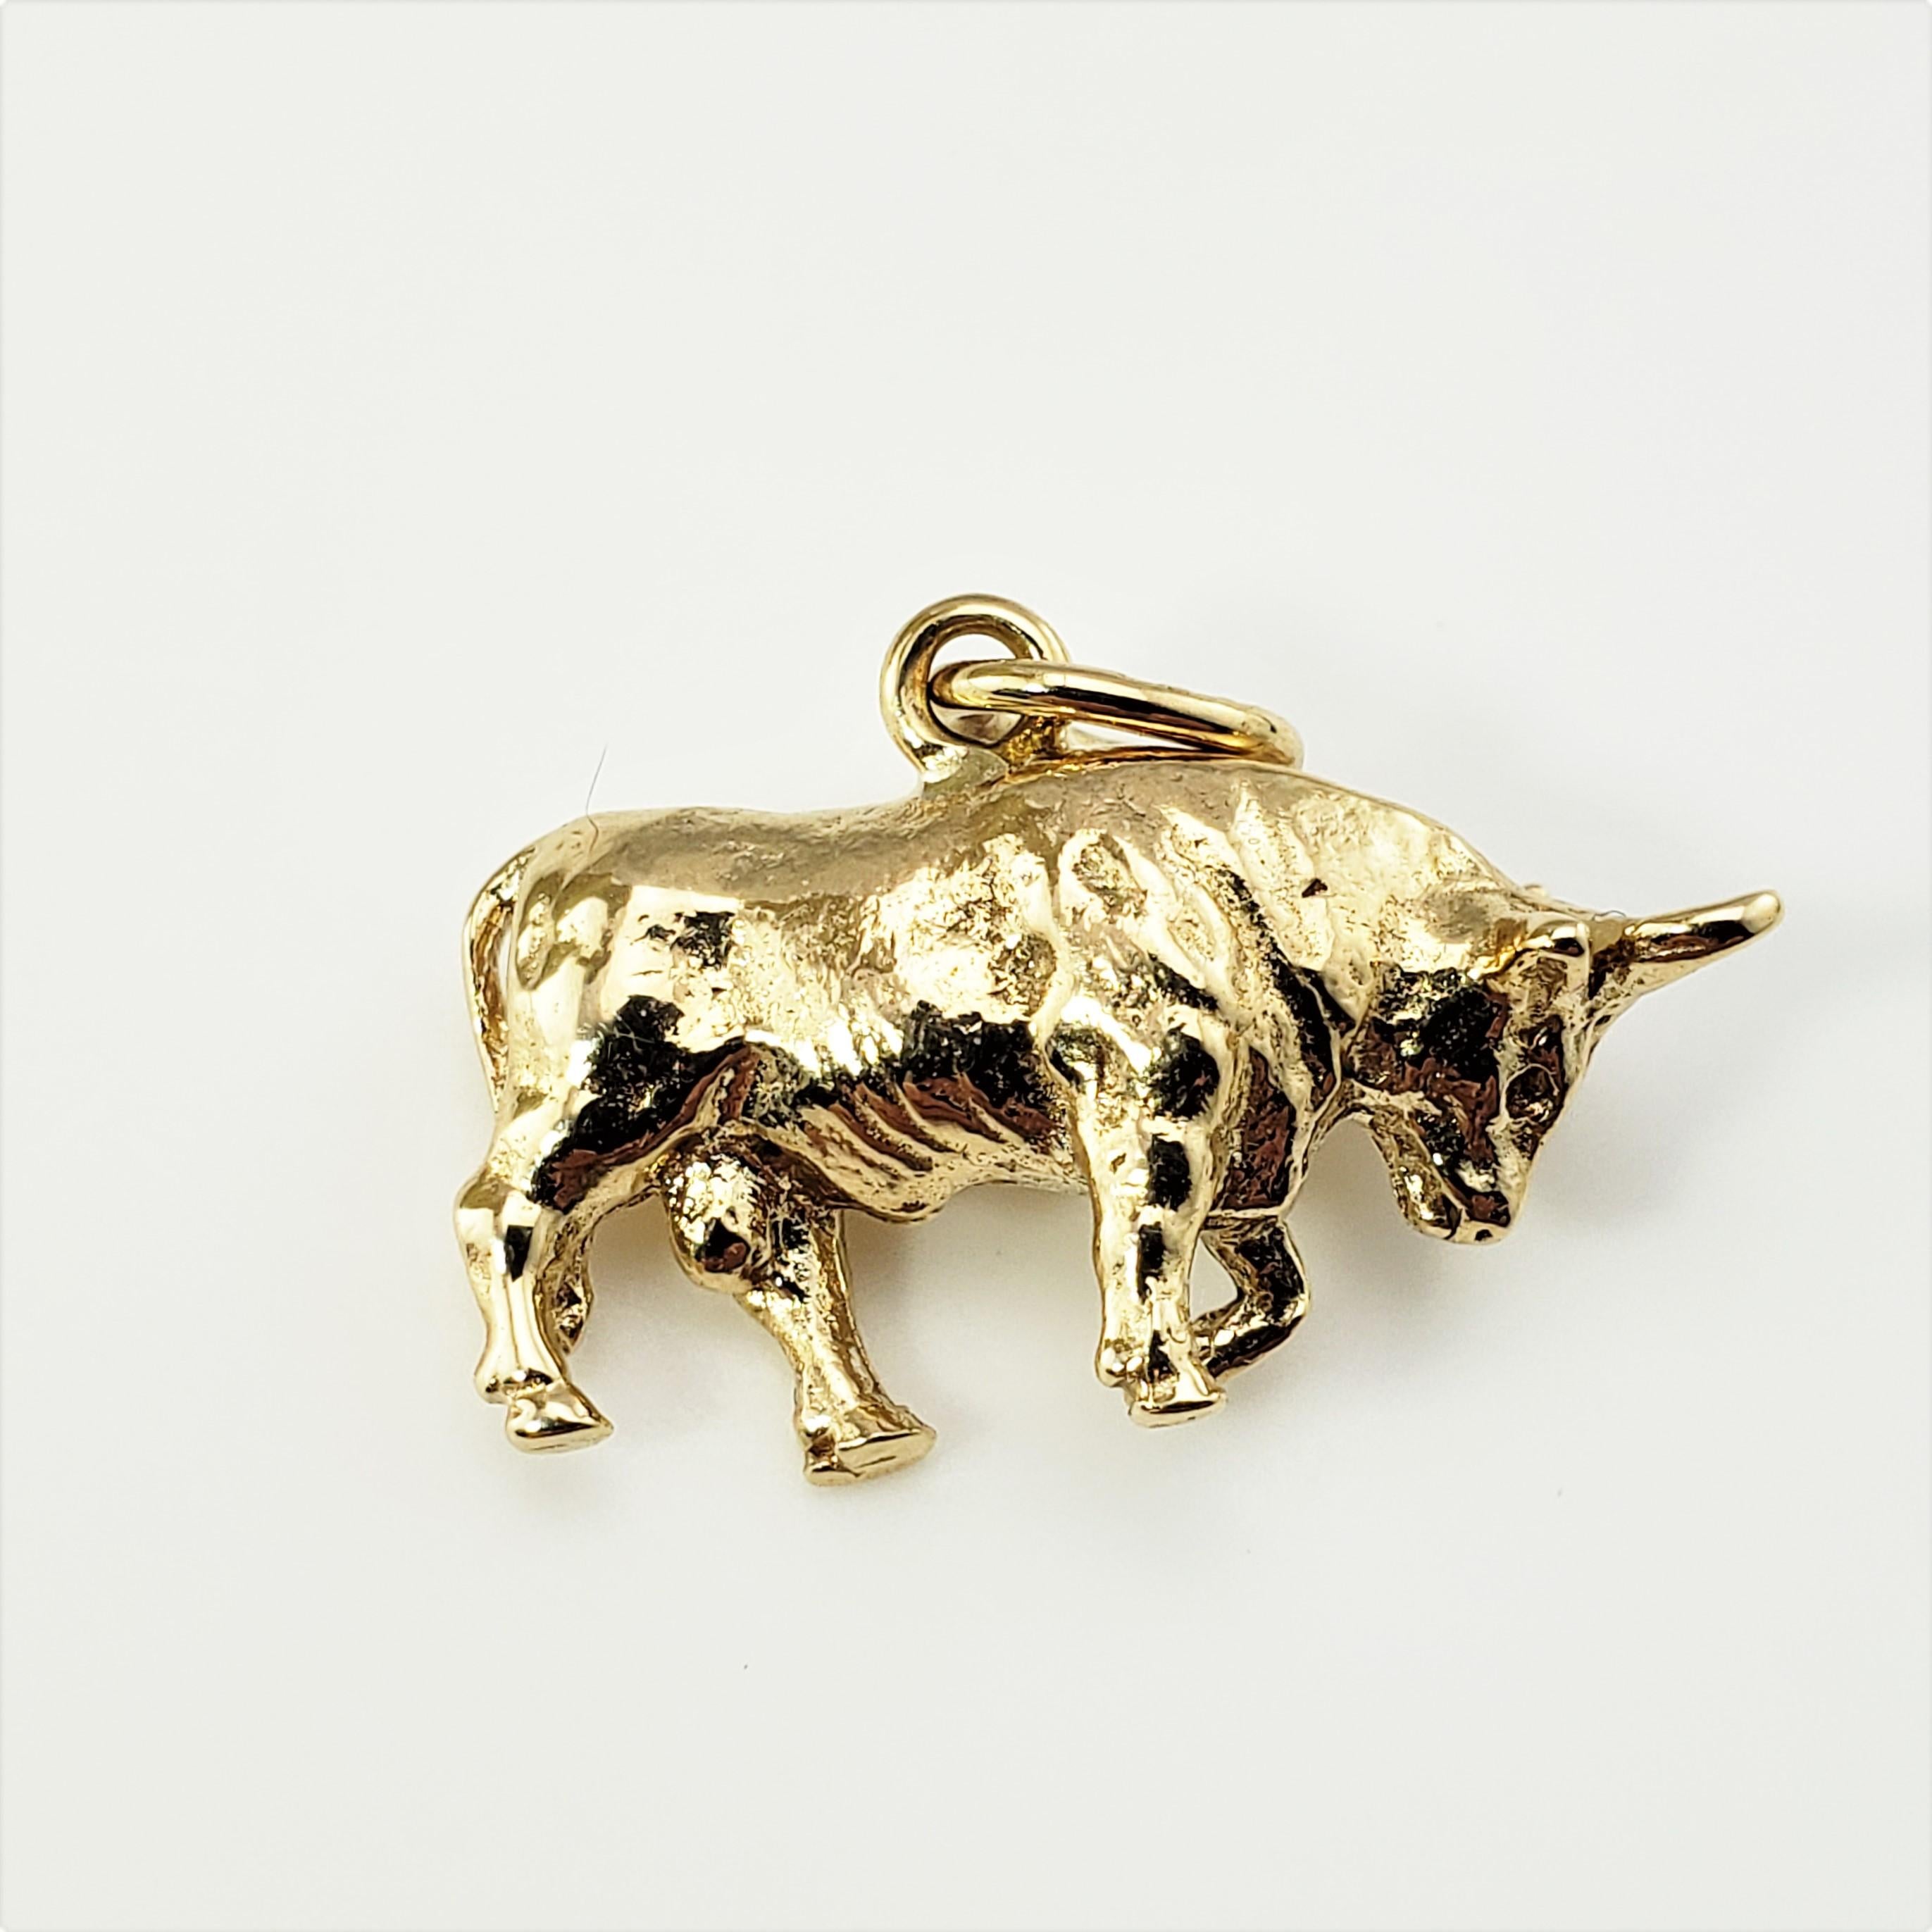 14 Karat Yellow Gold Bull Charm-

This lovely 3D charm features a miniature bull meticulously detailed in 14K yellow gold.

Size:  14 mm x  20 mm (actual charm)

Weight:  2.7 dwt. /  4.3 gr.

Stamped: 14K

* Chain not included

Very good condition,